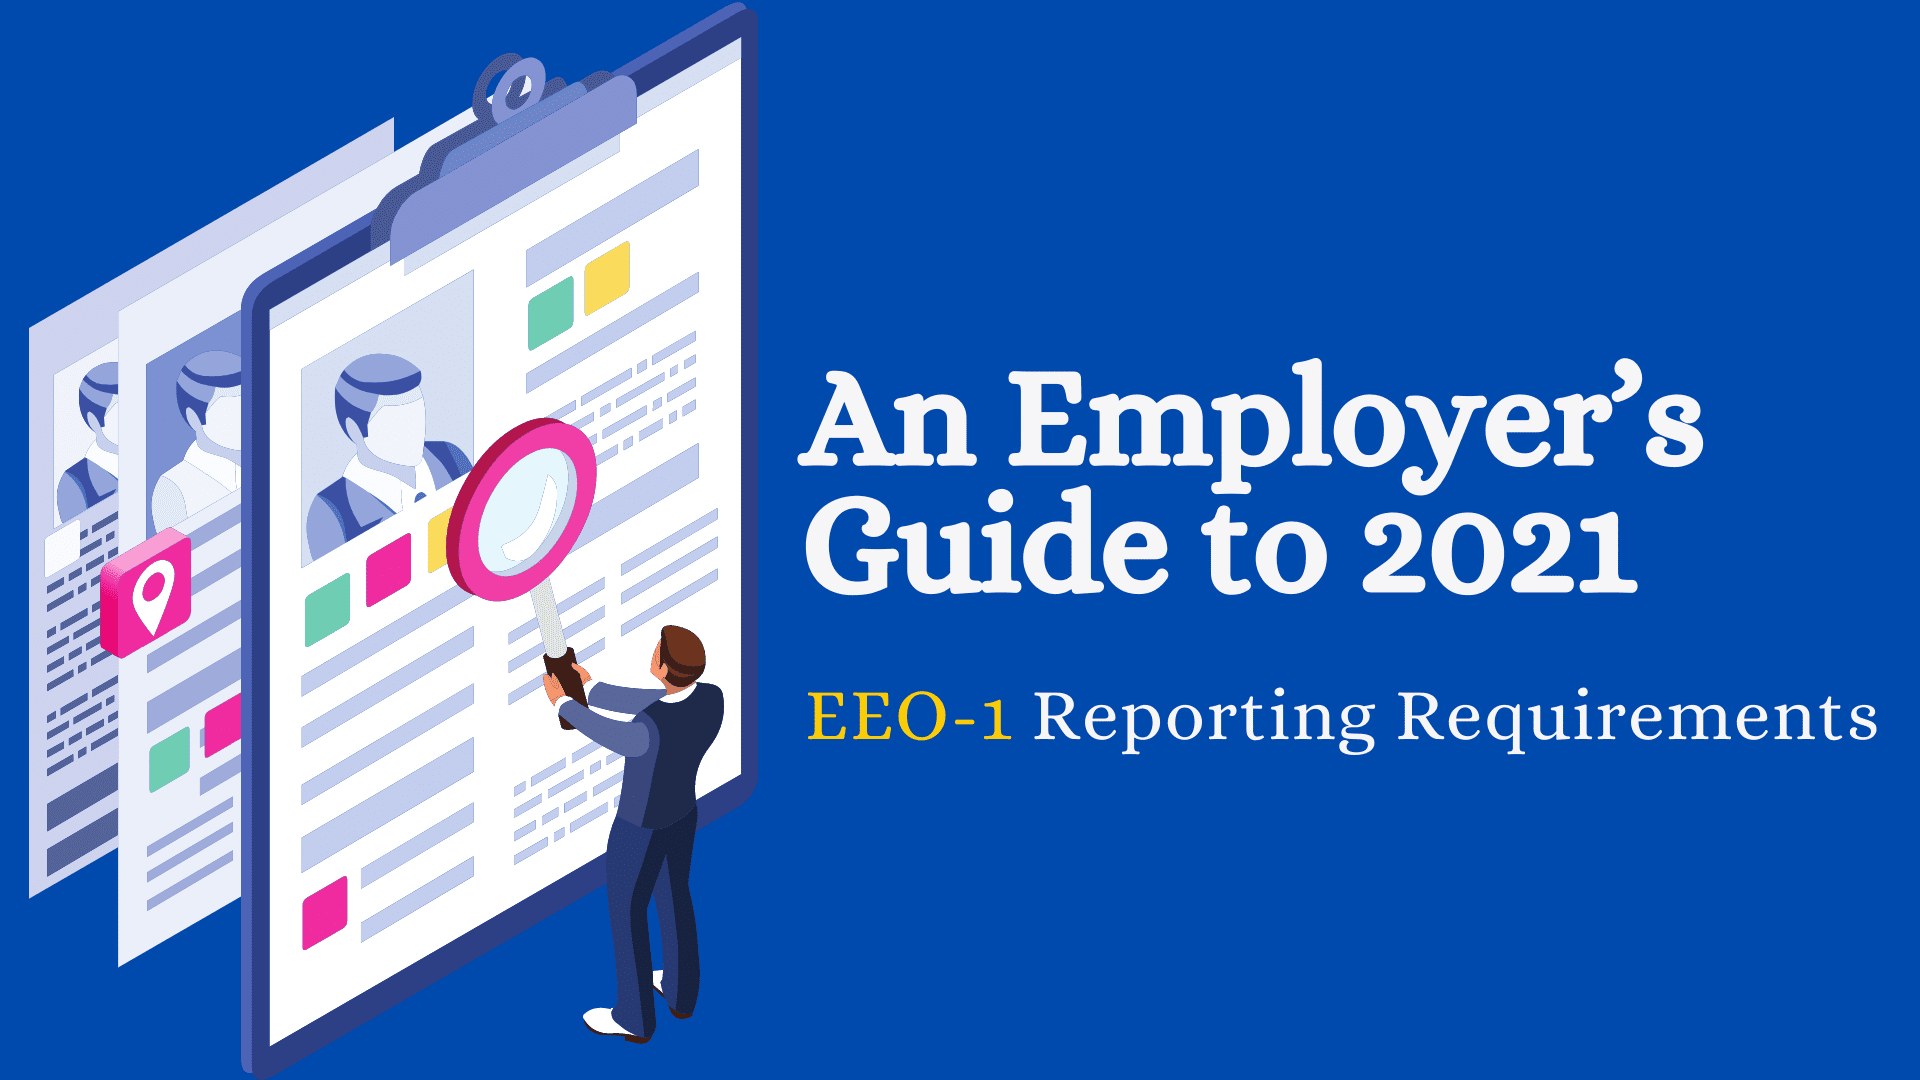 An Employer’s Guide to 2021 EEO1 Reporting Requirements Corporate